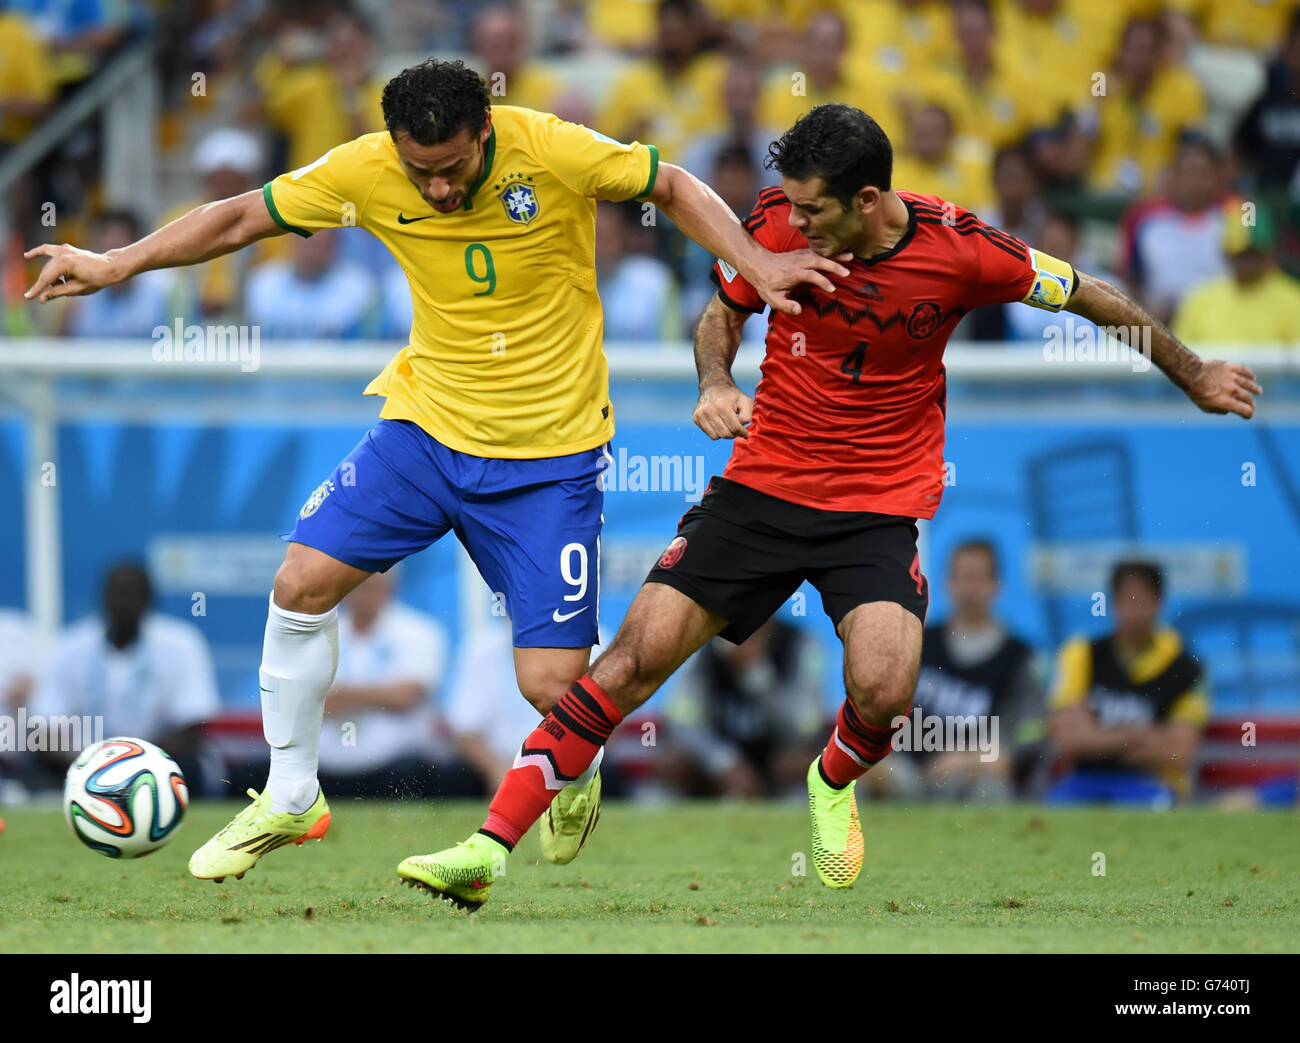 Soccer - FIFA World Cup 2014 - Group A - Brazil v Mexico - Estadio Castelao. Brazil's Fred (left) battles for the ball with Mexico's Rafael Marquez Stock Photo